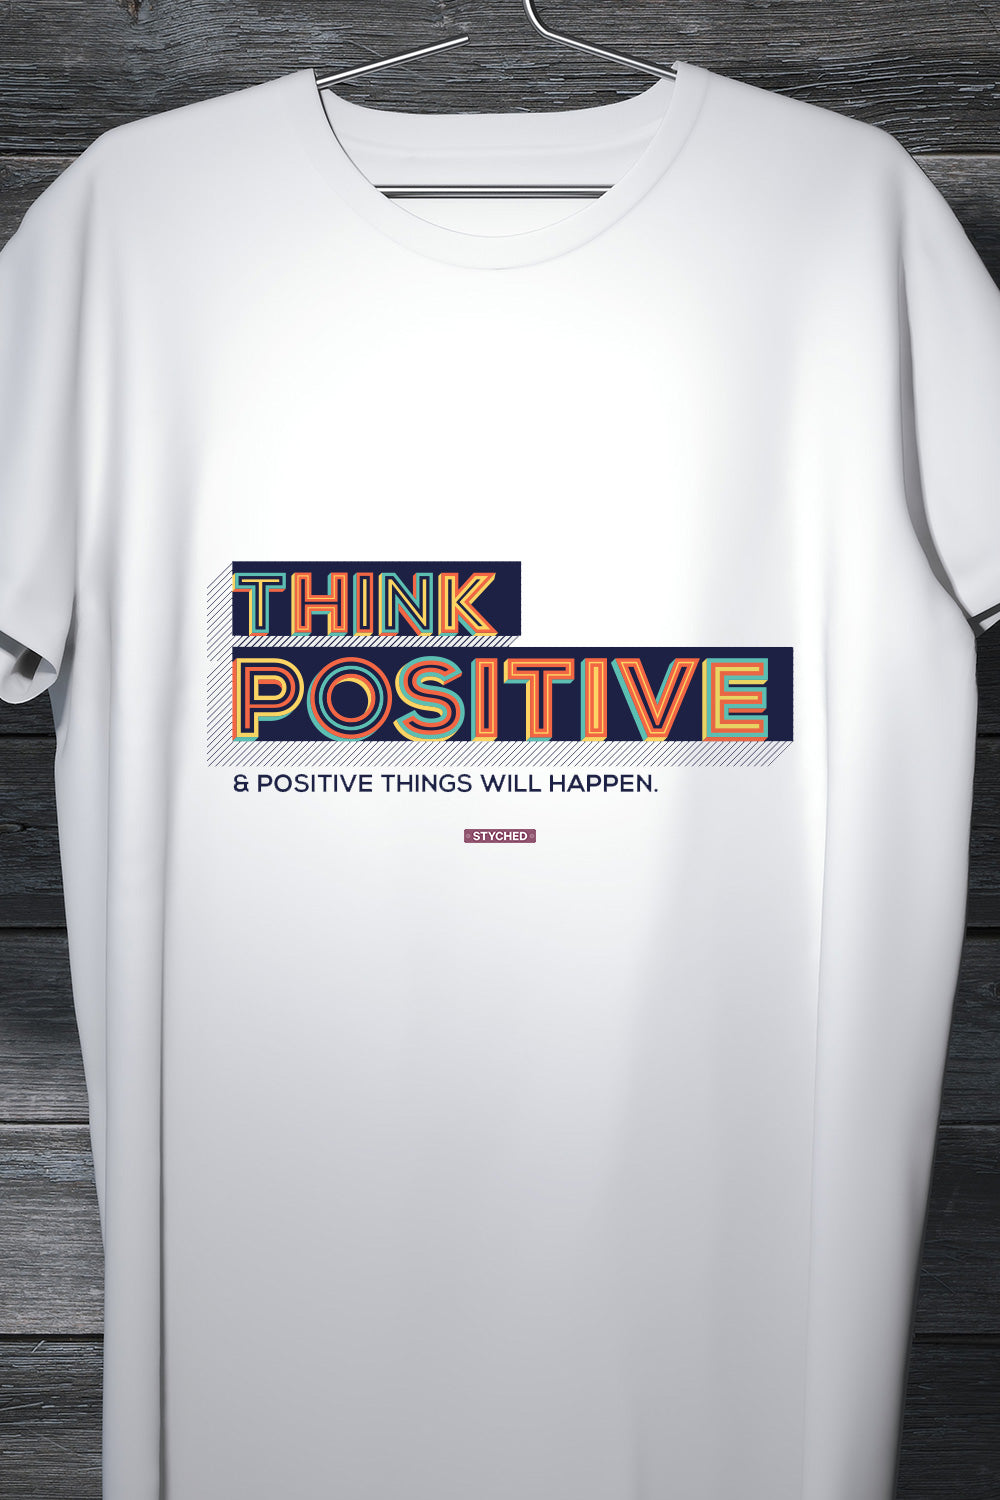 Think Positive and Positive things will happen - Contemporary Stylish White TShirt